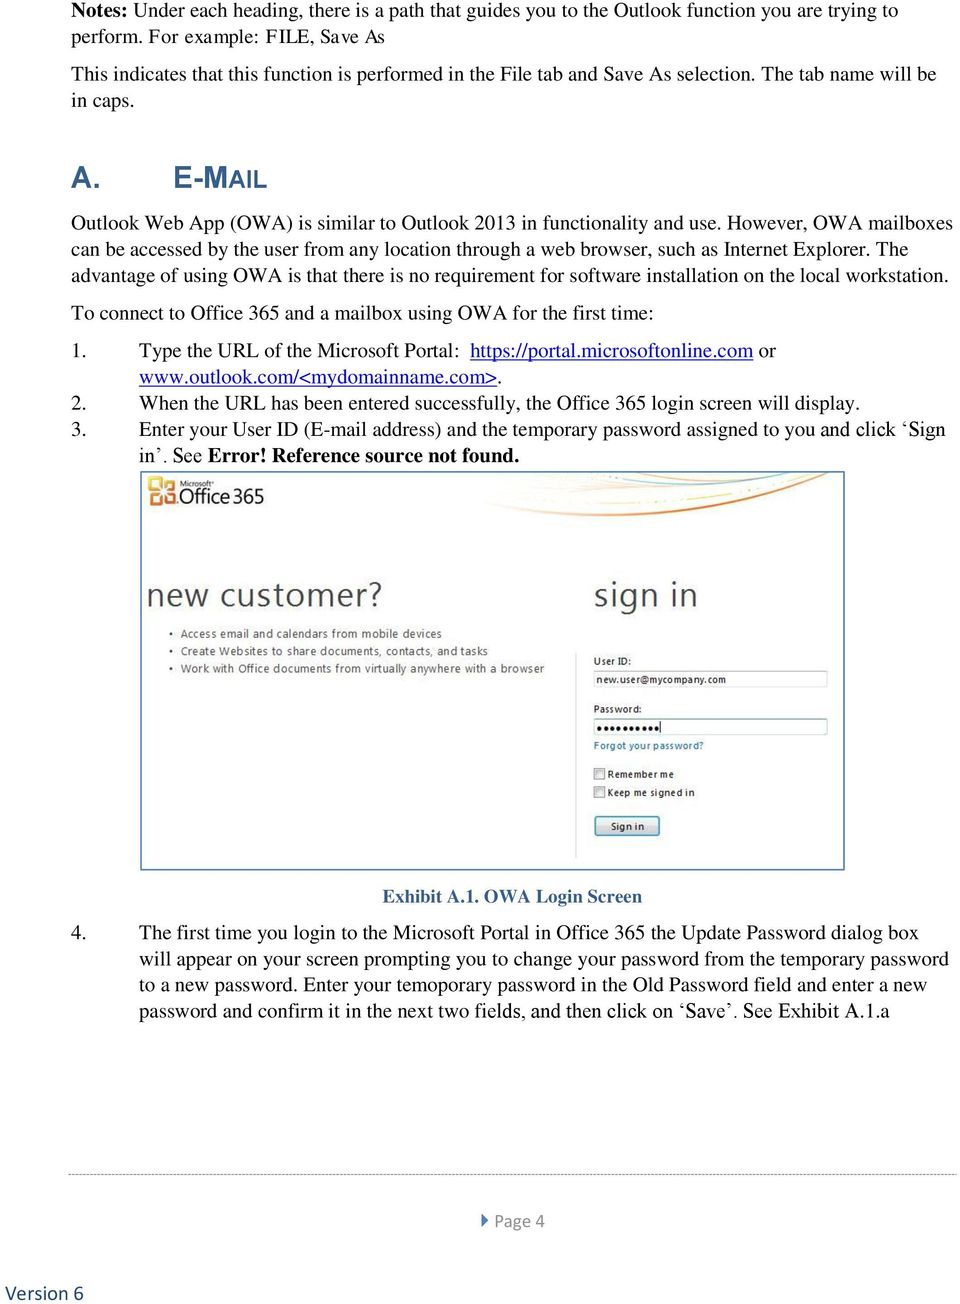 However, OWA mailboxes can be accessed by the user from any location through a web browser, such as Internet Explorer.